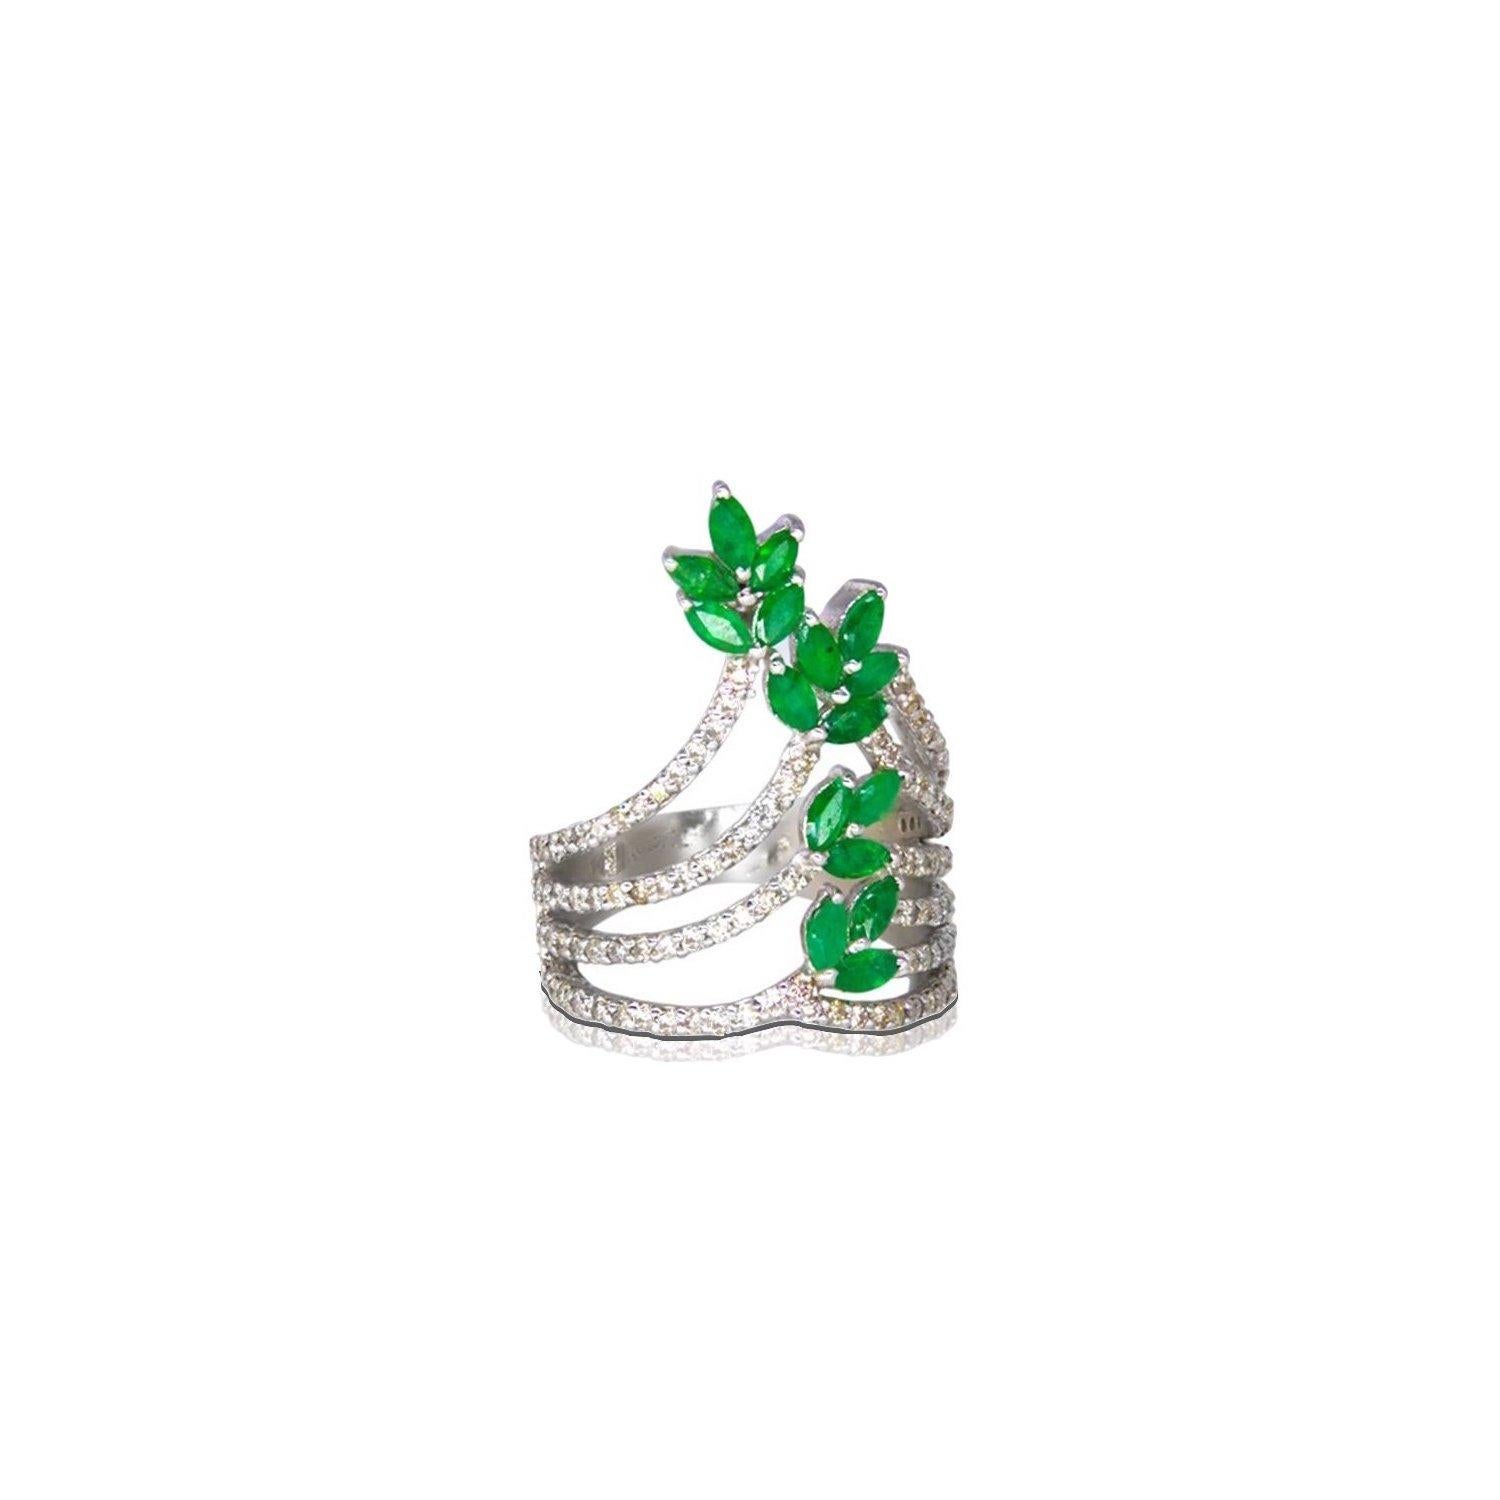 A delicate and contemporary floral design in a beautiful shield ring of Sterling Silver with 18 Karat White Gold high polish.  This ring is set with 2.10 Carats of fiery Emerald leaves and .44 Carats of sparkling White Diamonds.